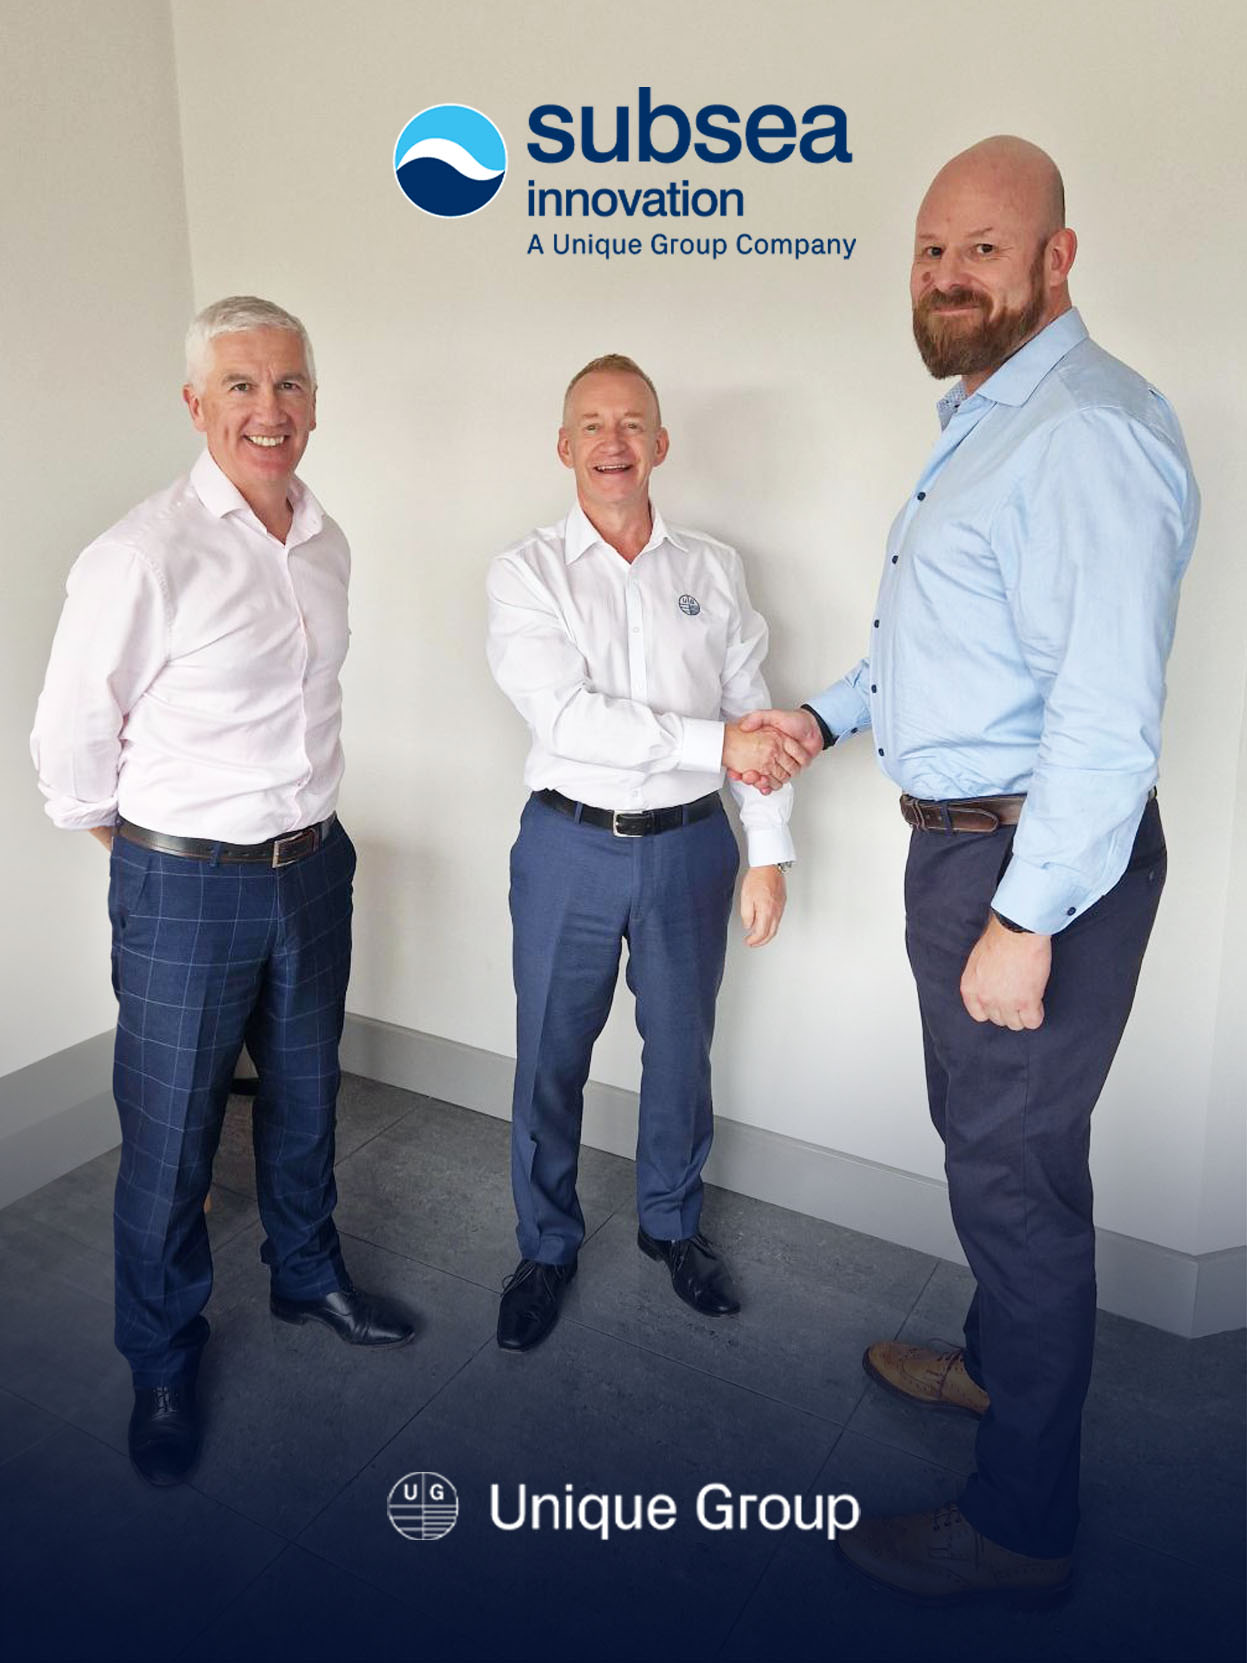 From left to right Alasdair MacDonald CEO of Tekmar Group Martin Charles COO of Unique Group shake hands with Dave Thompson Managing Director of Subsea Innovation after the acquisition